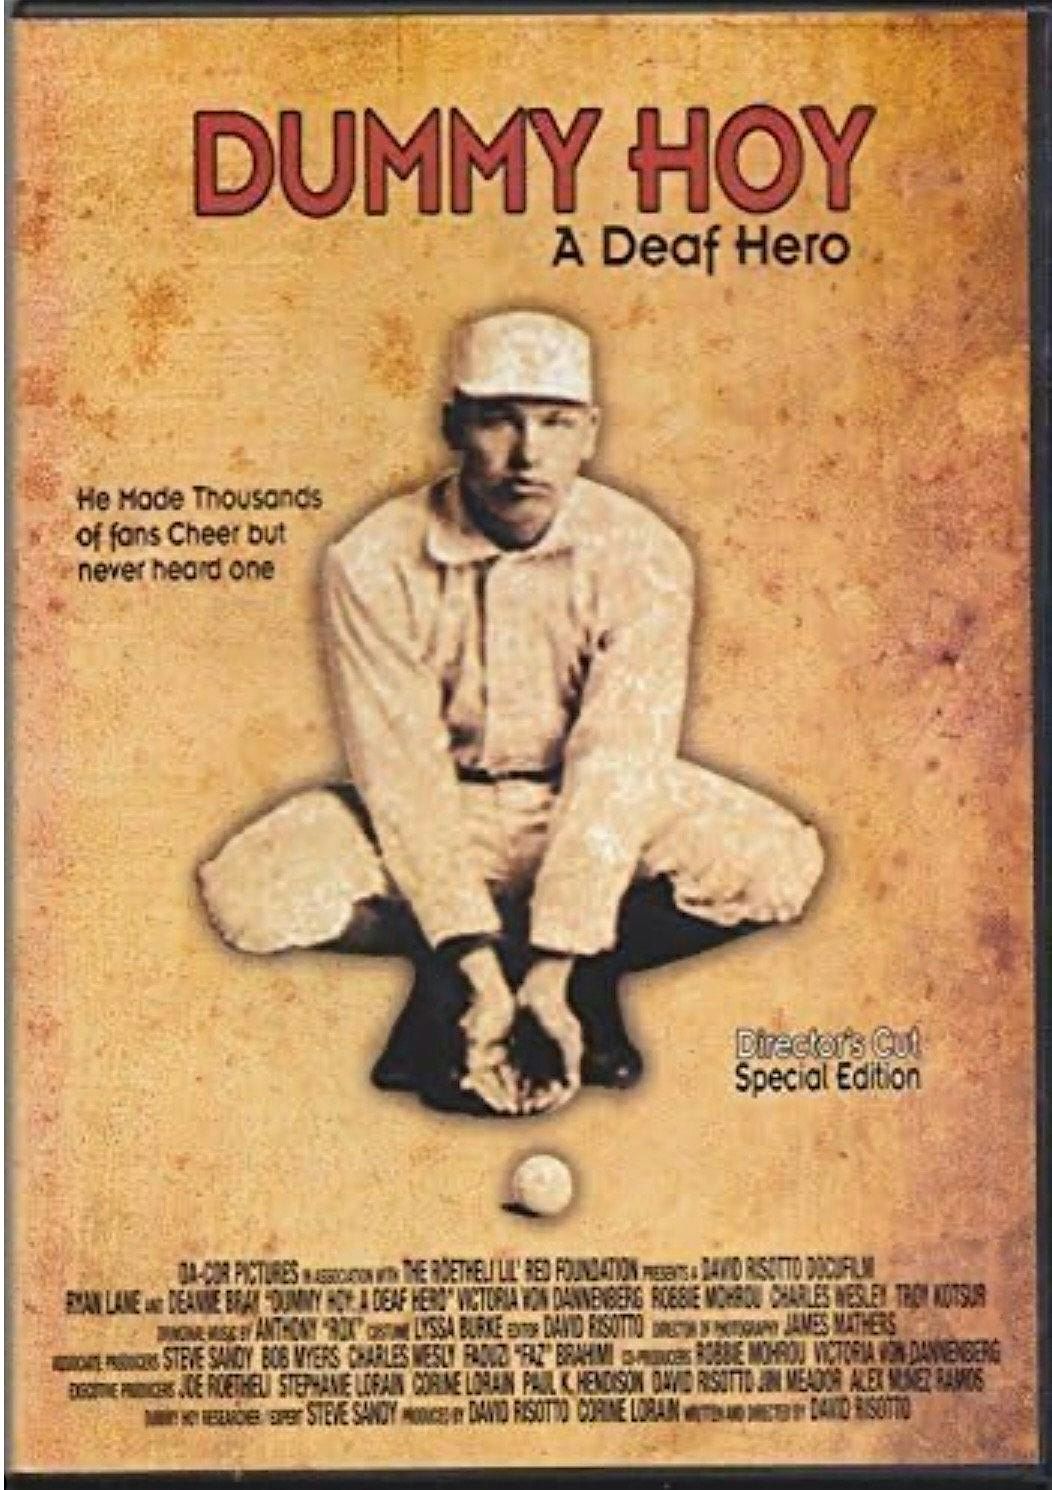 Dummy Hoy The Documentary about the first deaf baseball player!